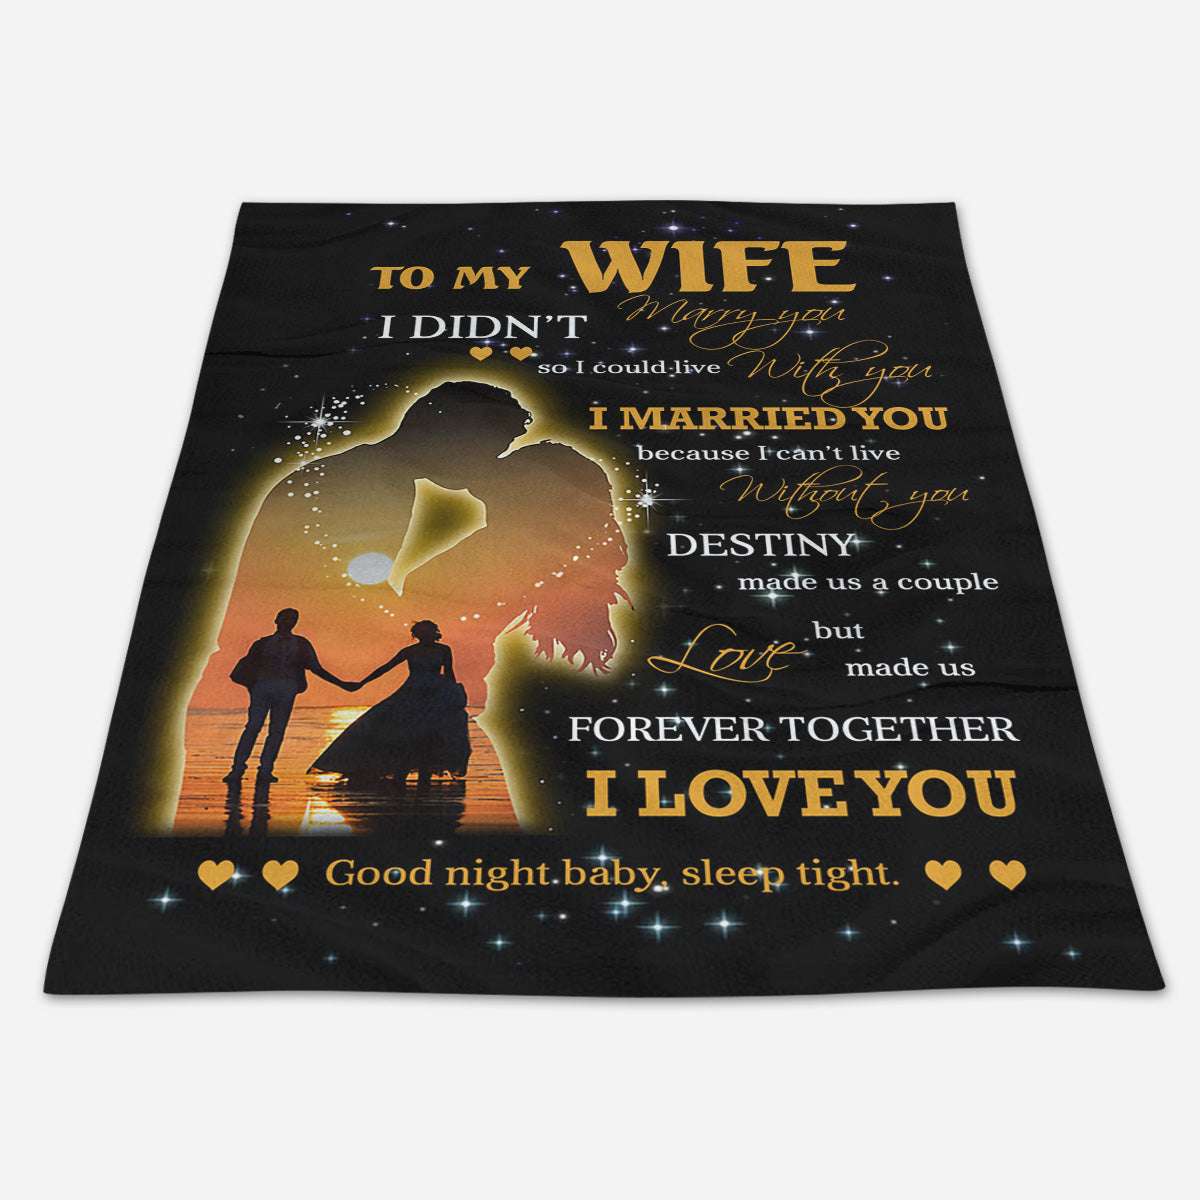 I Love You And Good Night Baby To My Wife Blanket, Best Gift For Wife